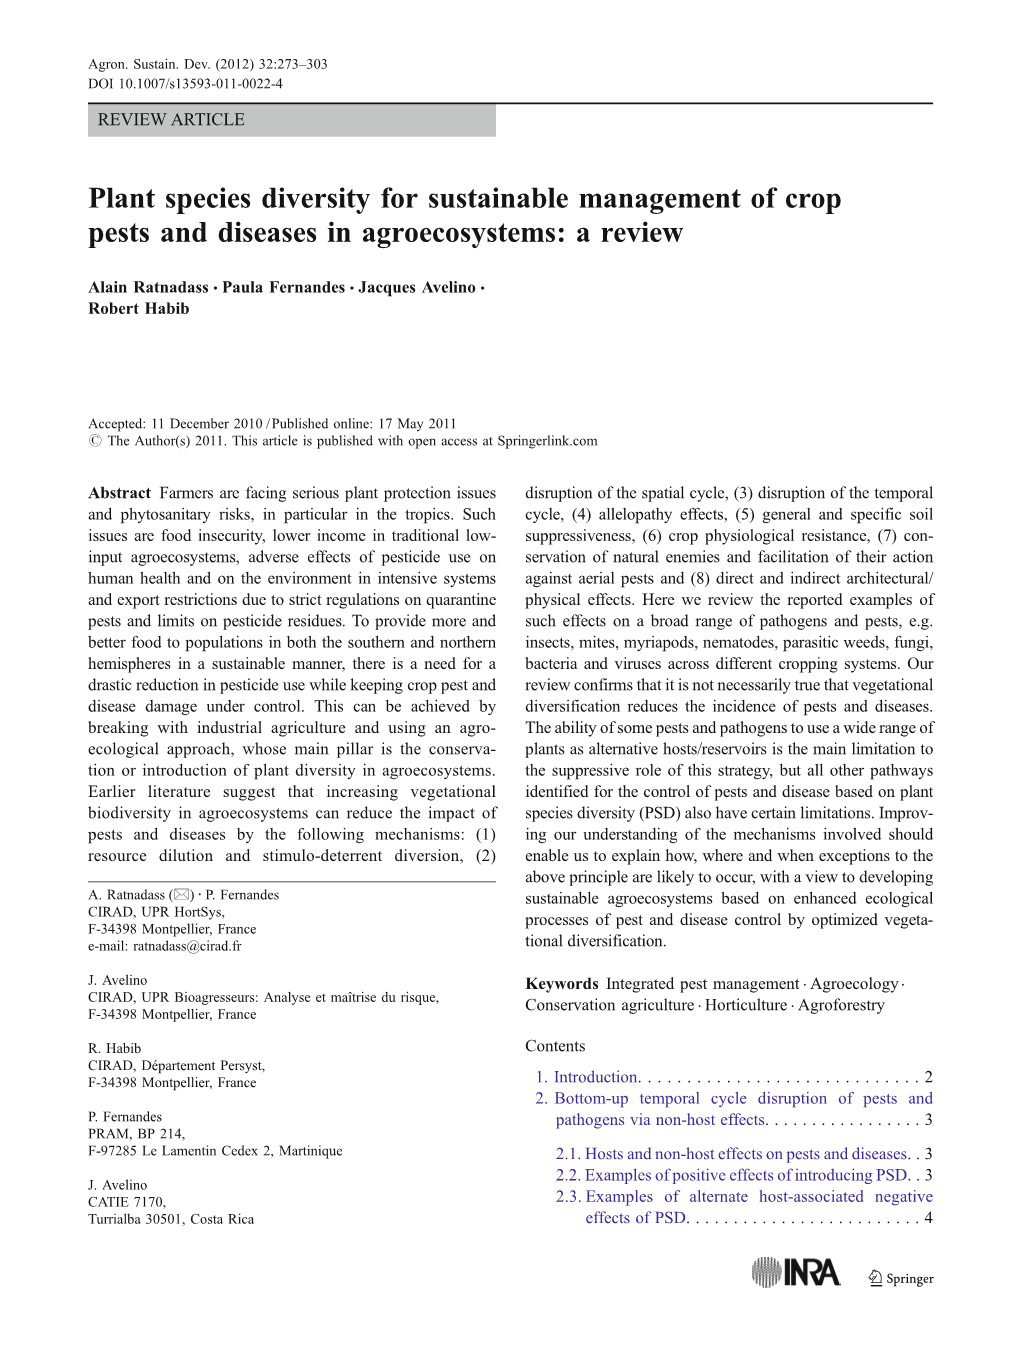 Plant Species Diversity for Sustainable Management of Crop Pests and Diseases in Agroecosystems: a Review